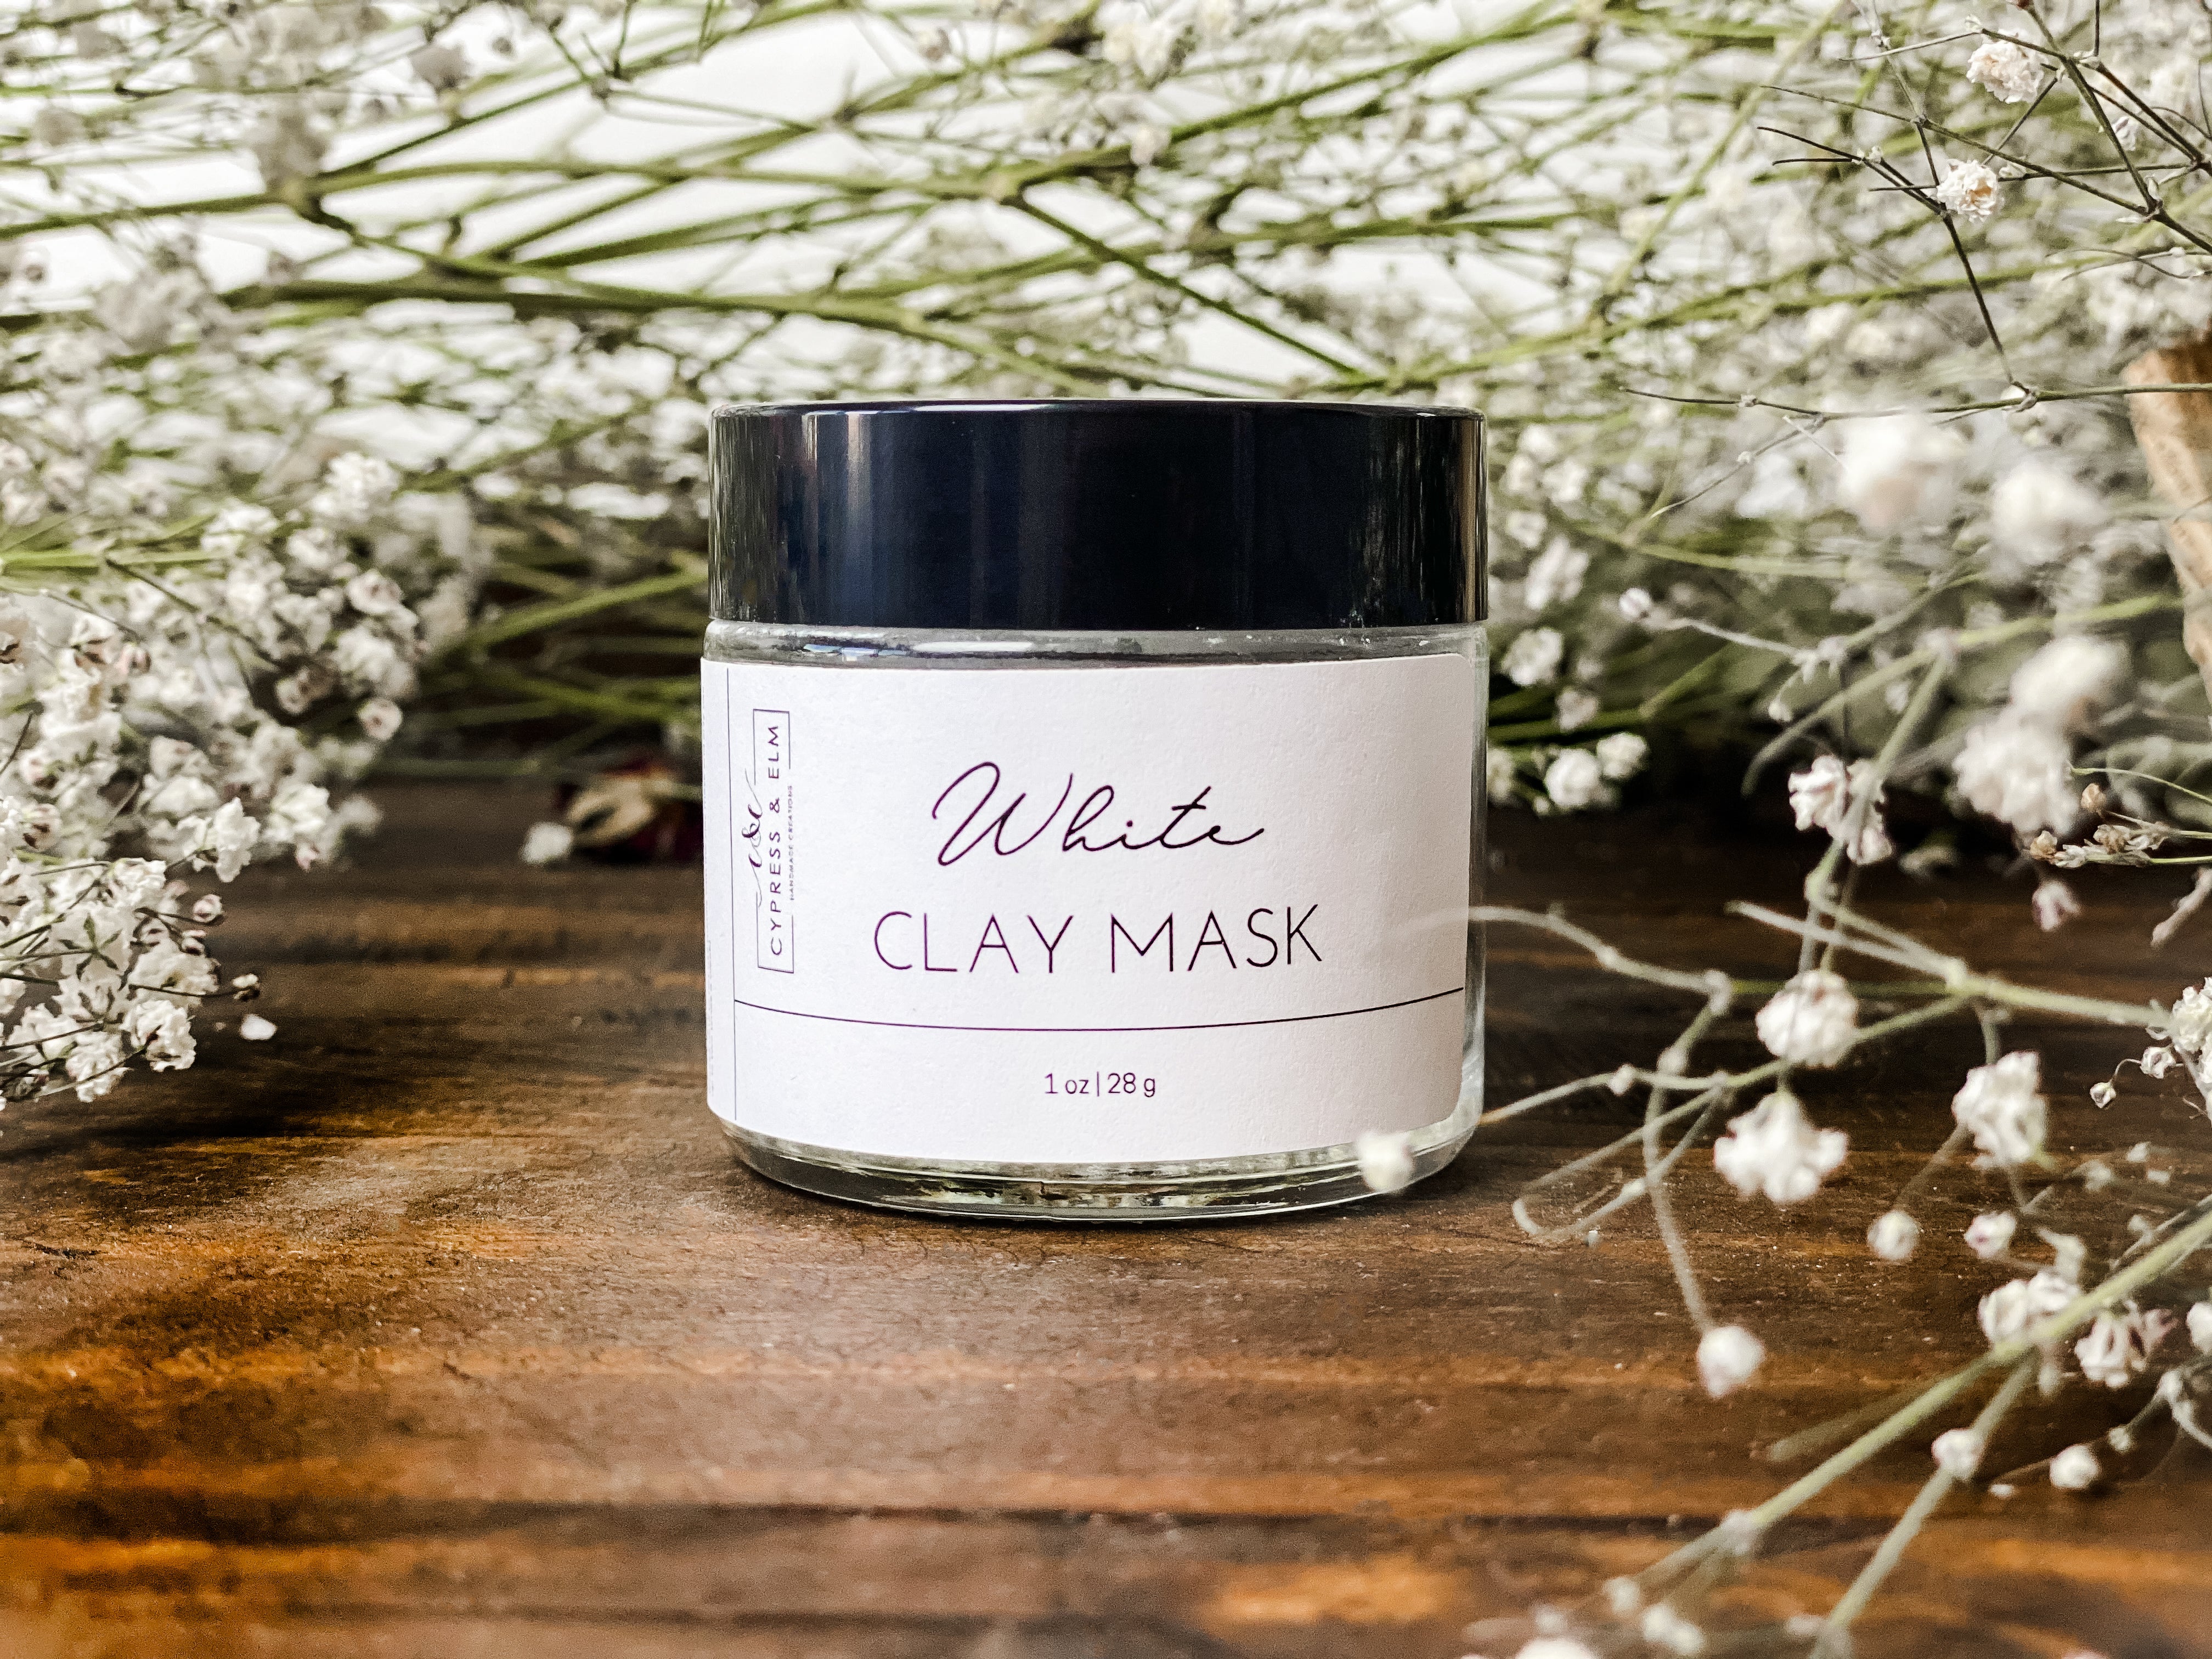 White Kaolin Clay & Clay Mask – and elm